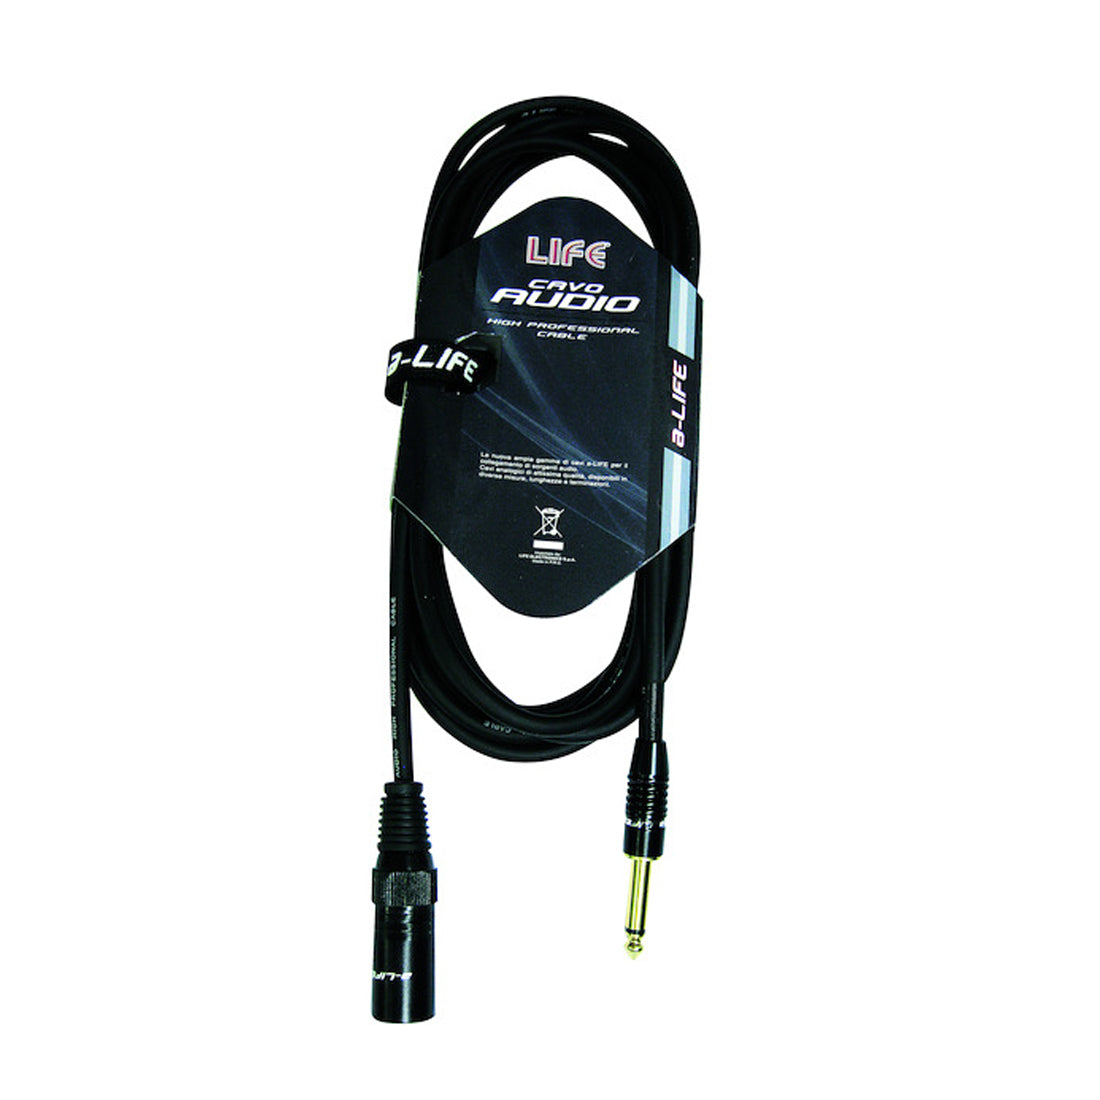 Life Audio cable Jack plug 6.3 mm mono and Cannon plug, microphone cable, XLR cable 1.5 meters